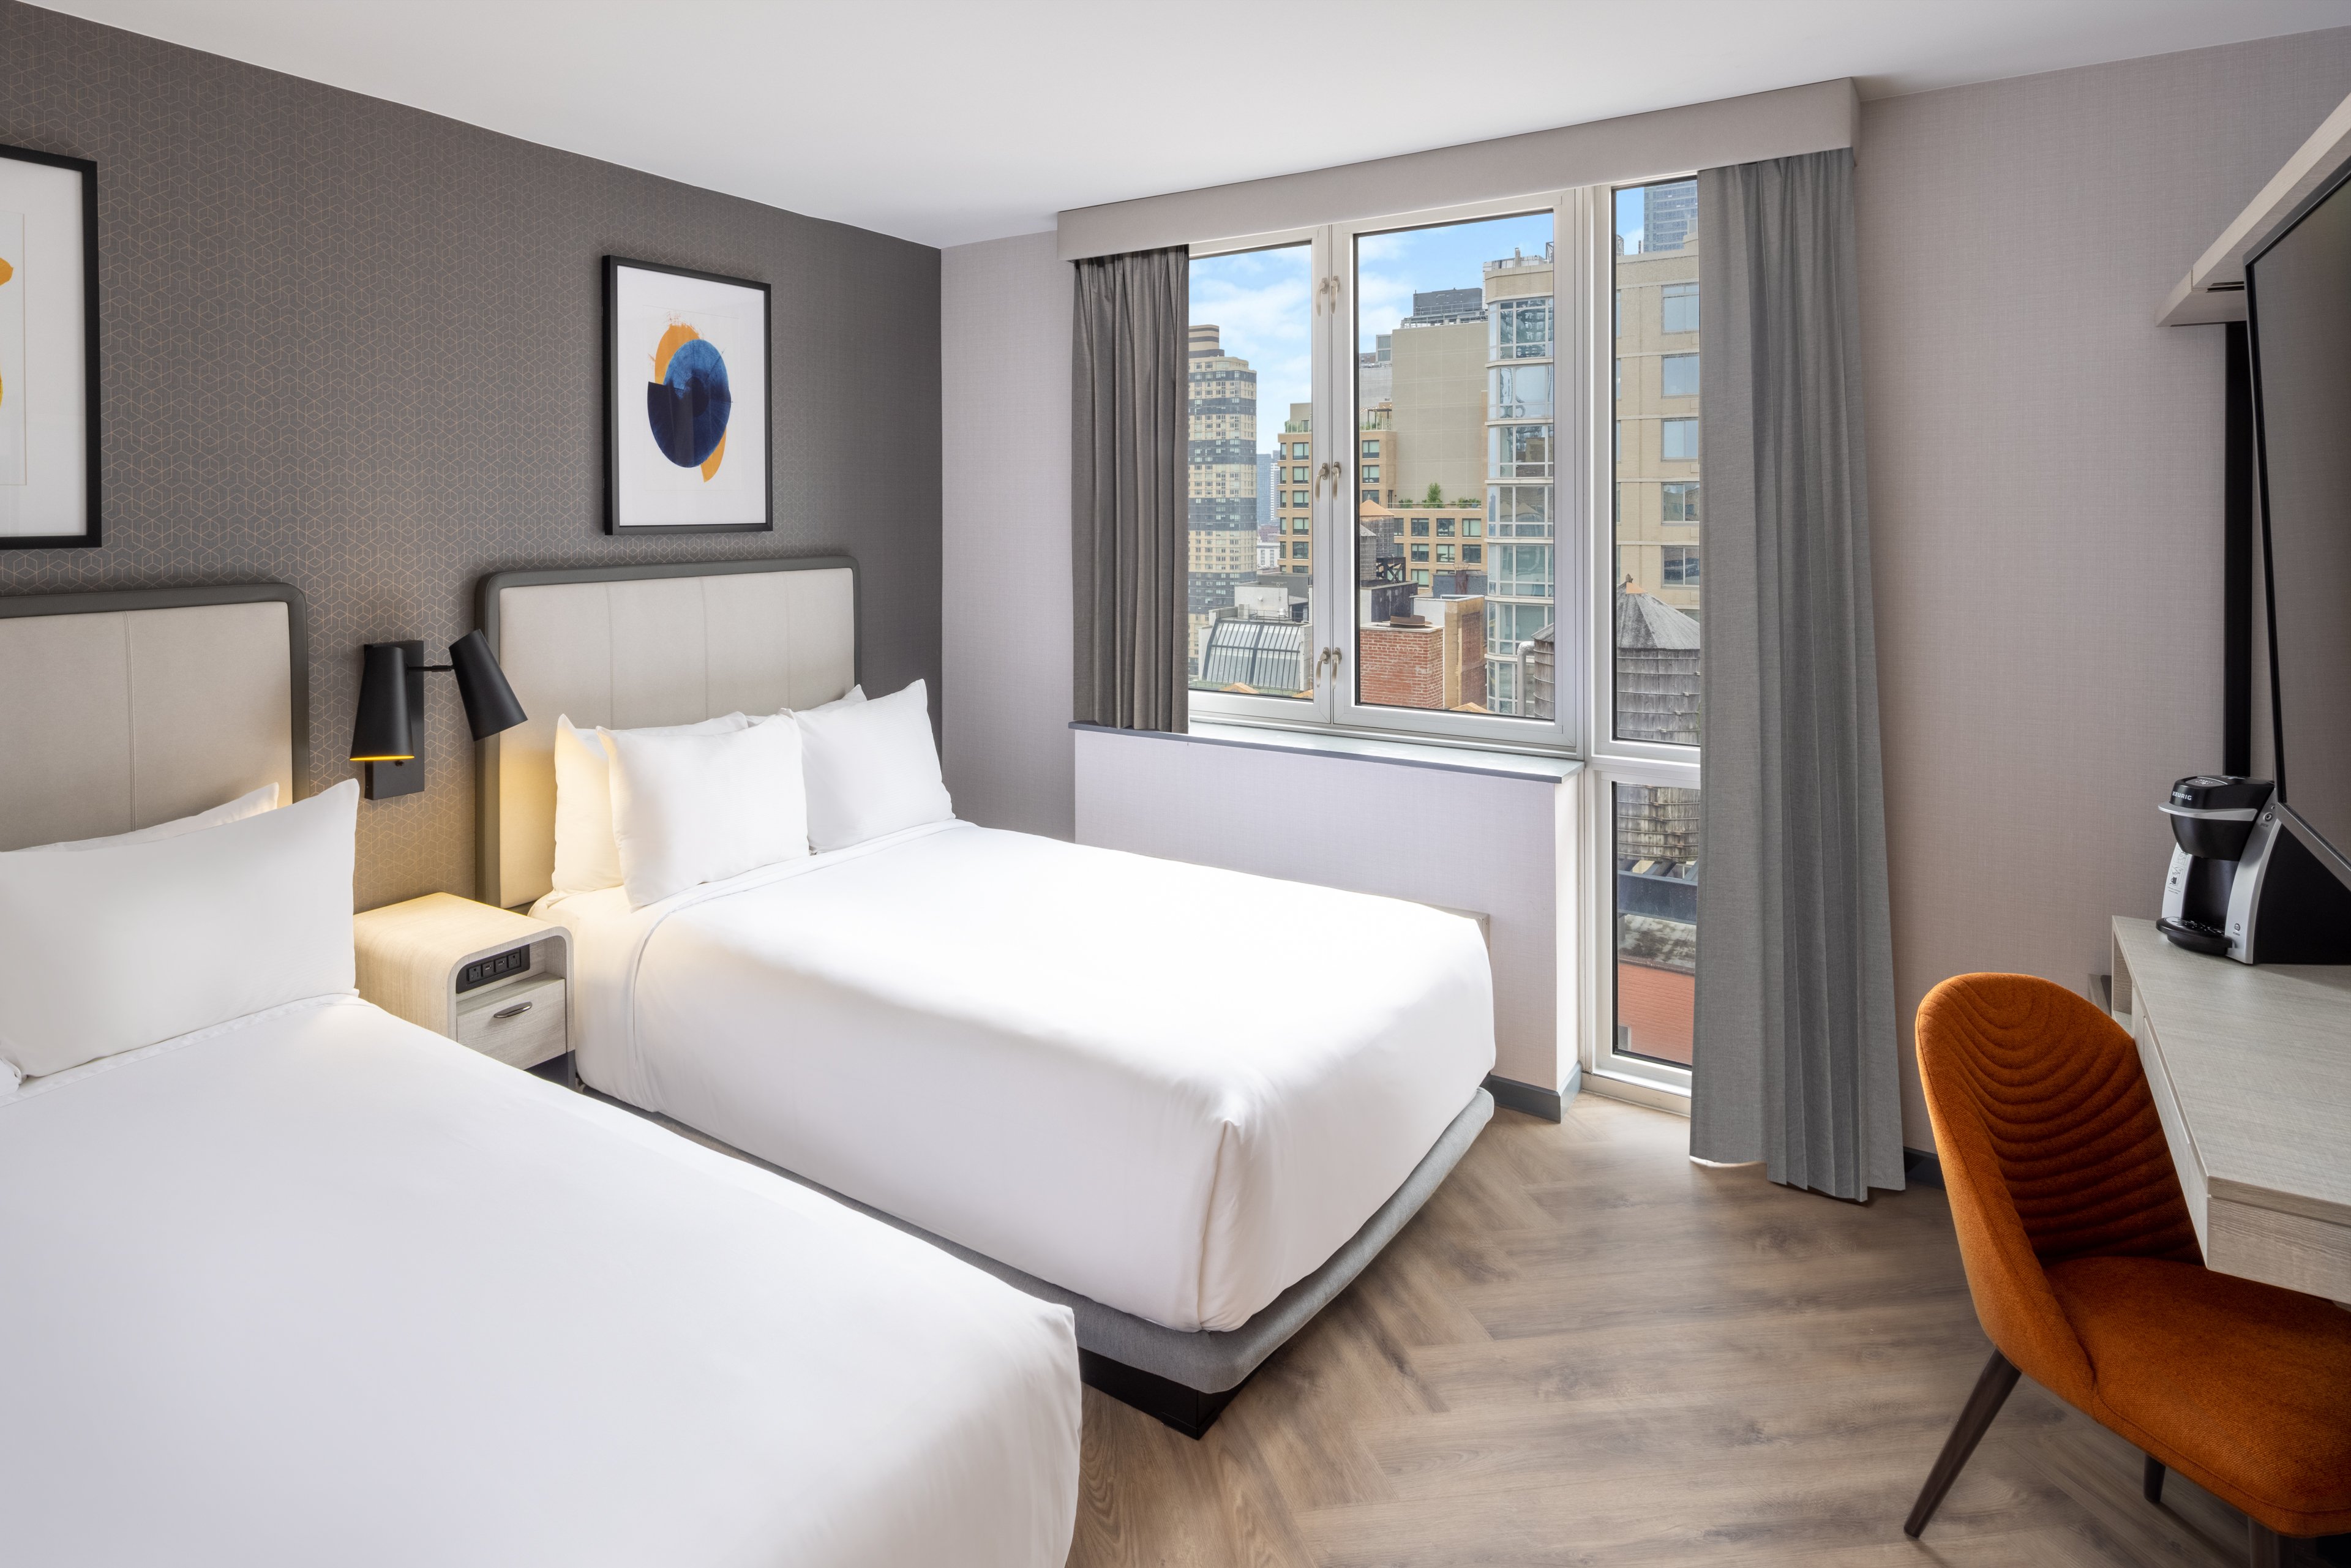 Renovated guest room with two double beds and views of Manhattan.